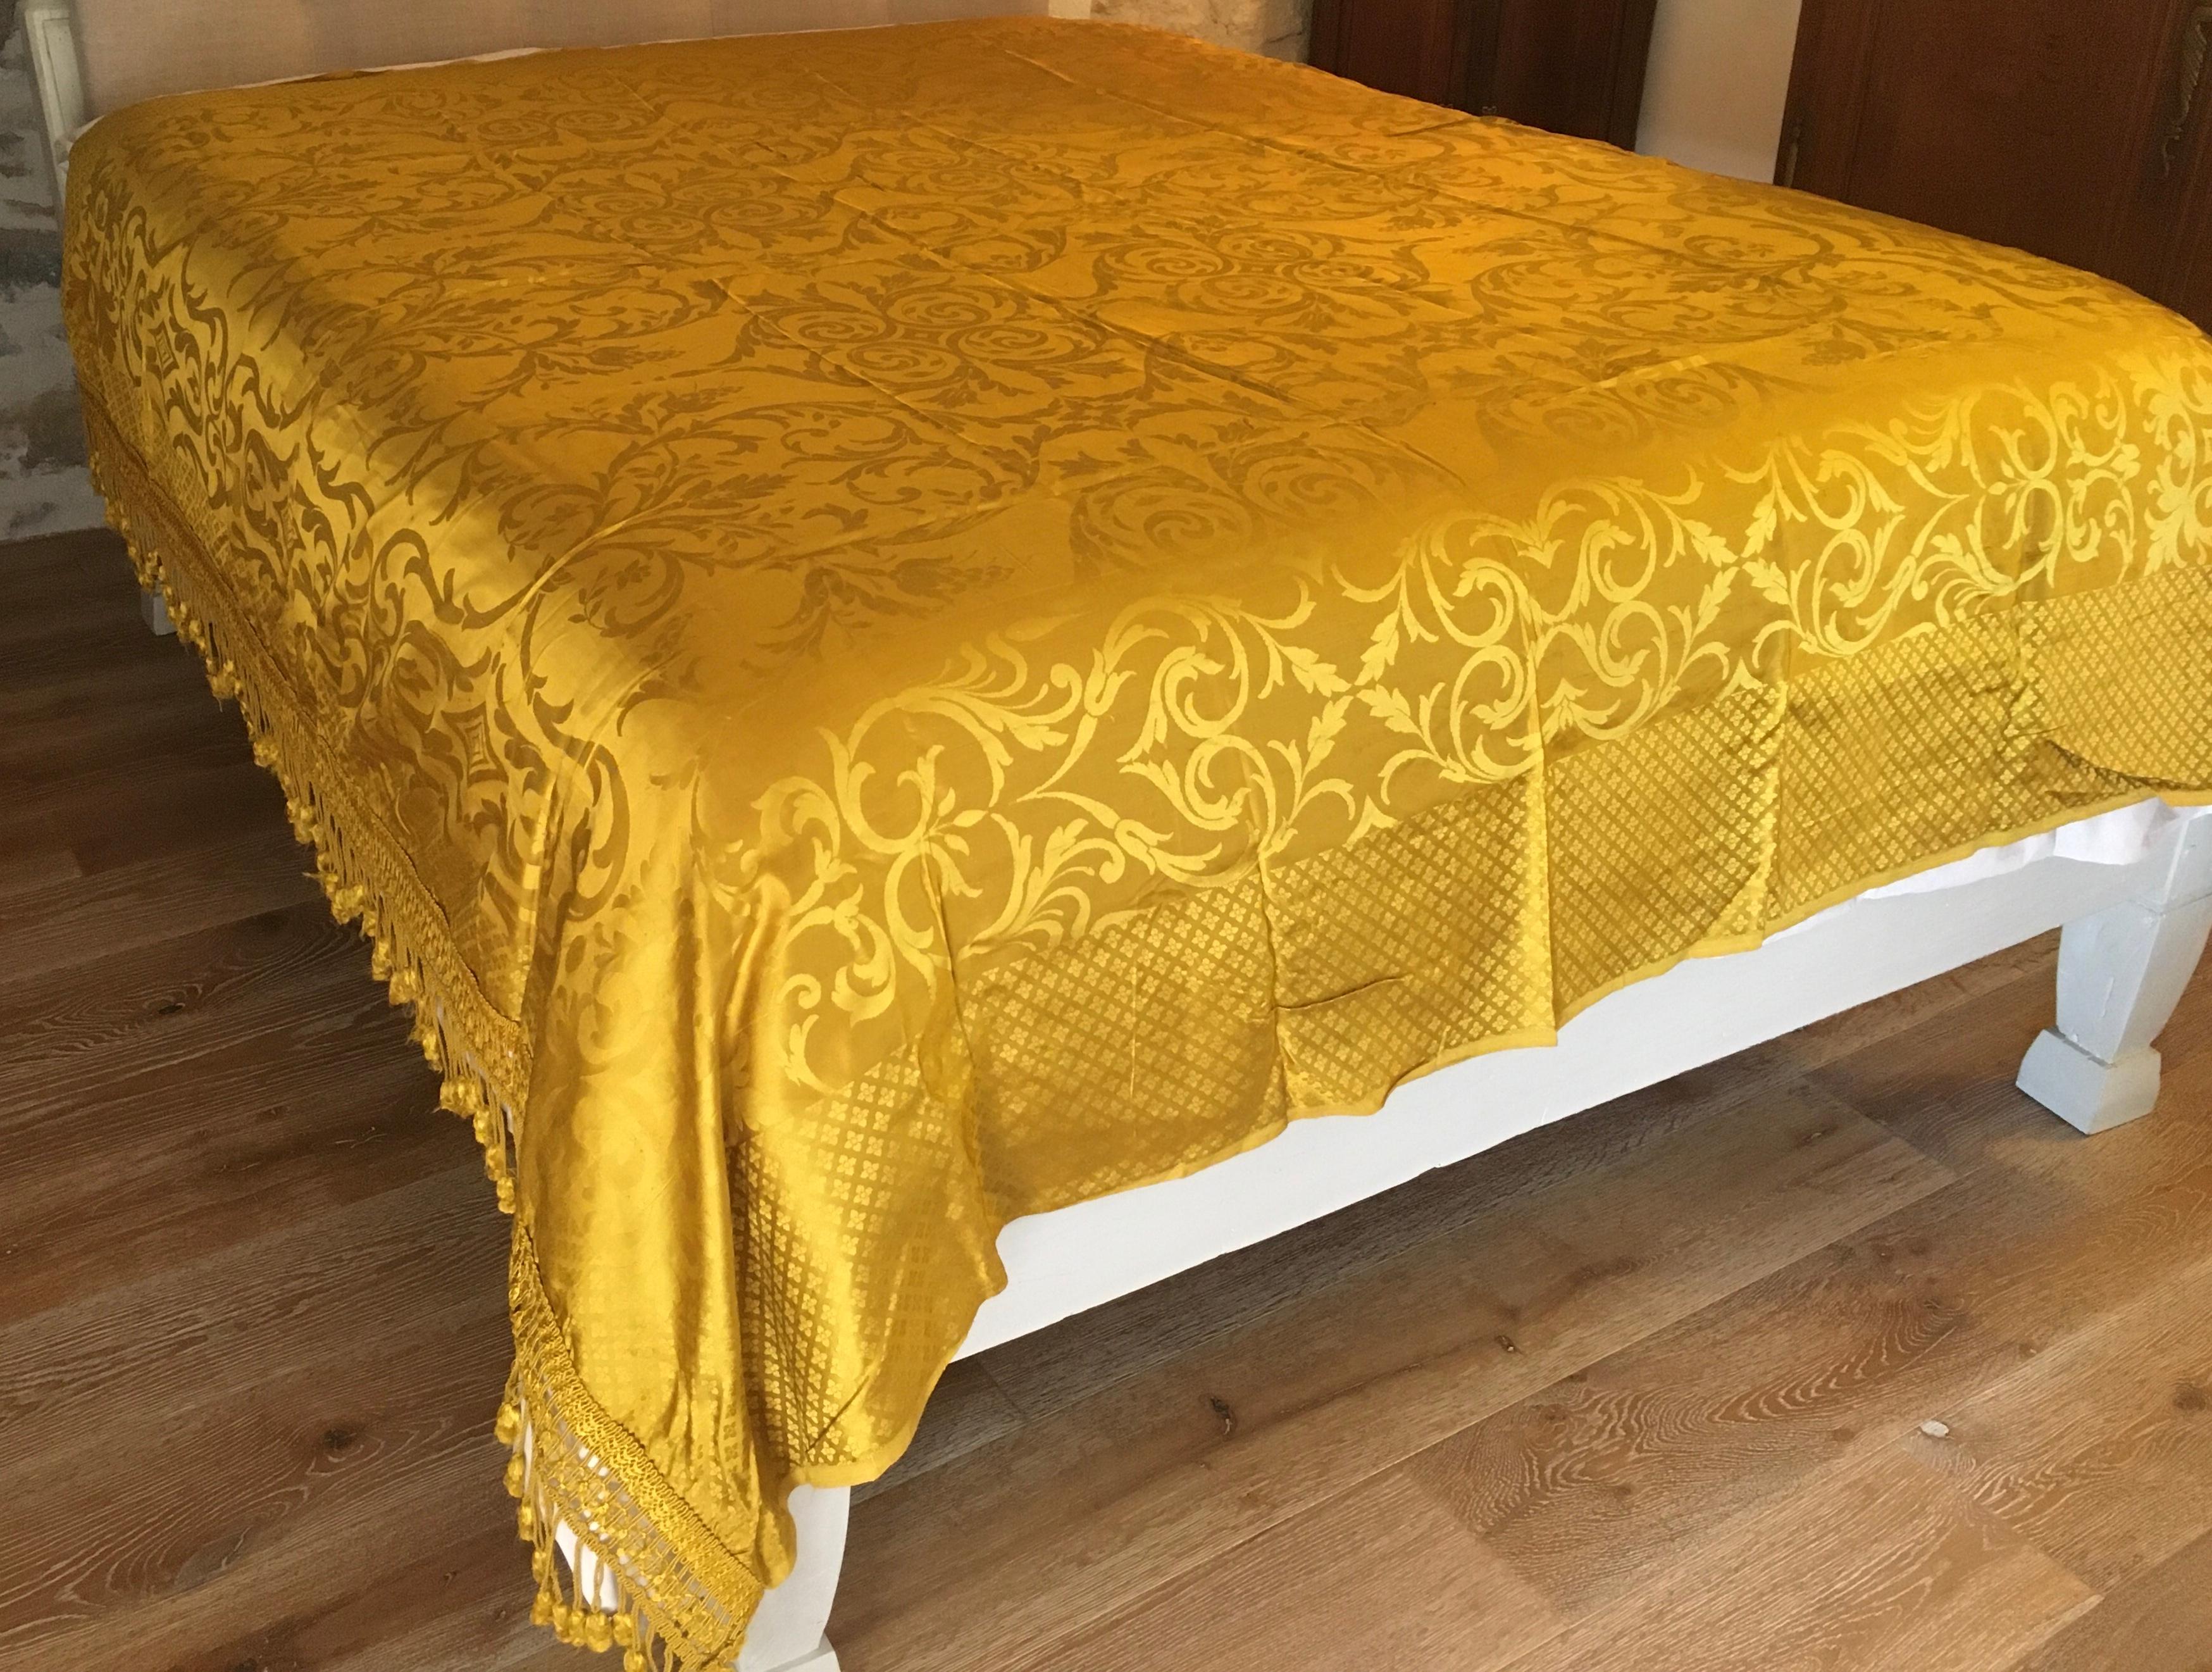 Beautiful bed throw or bedspread from Lelievre. 
Antique trims embellish the borders of the bed cover. 

Fits a queen bed.
Measures: 88” wide x 77” long

This fabric would also look great when used to make pillows. 